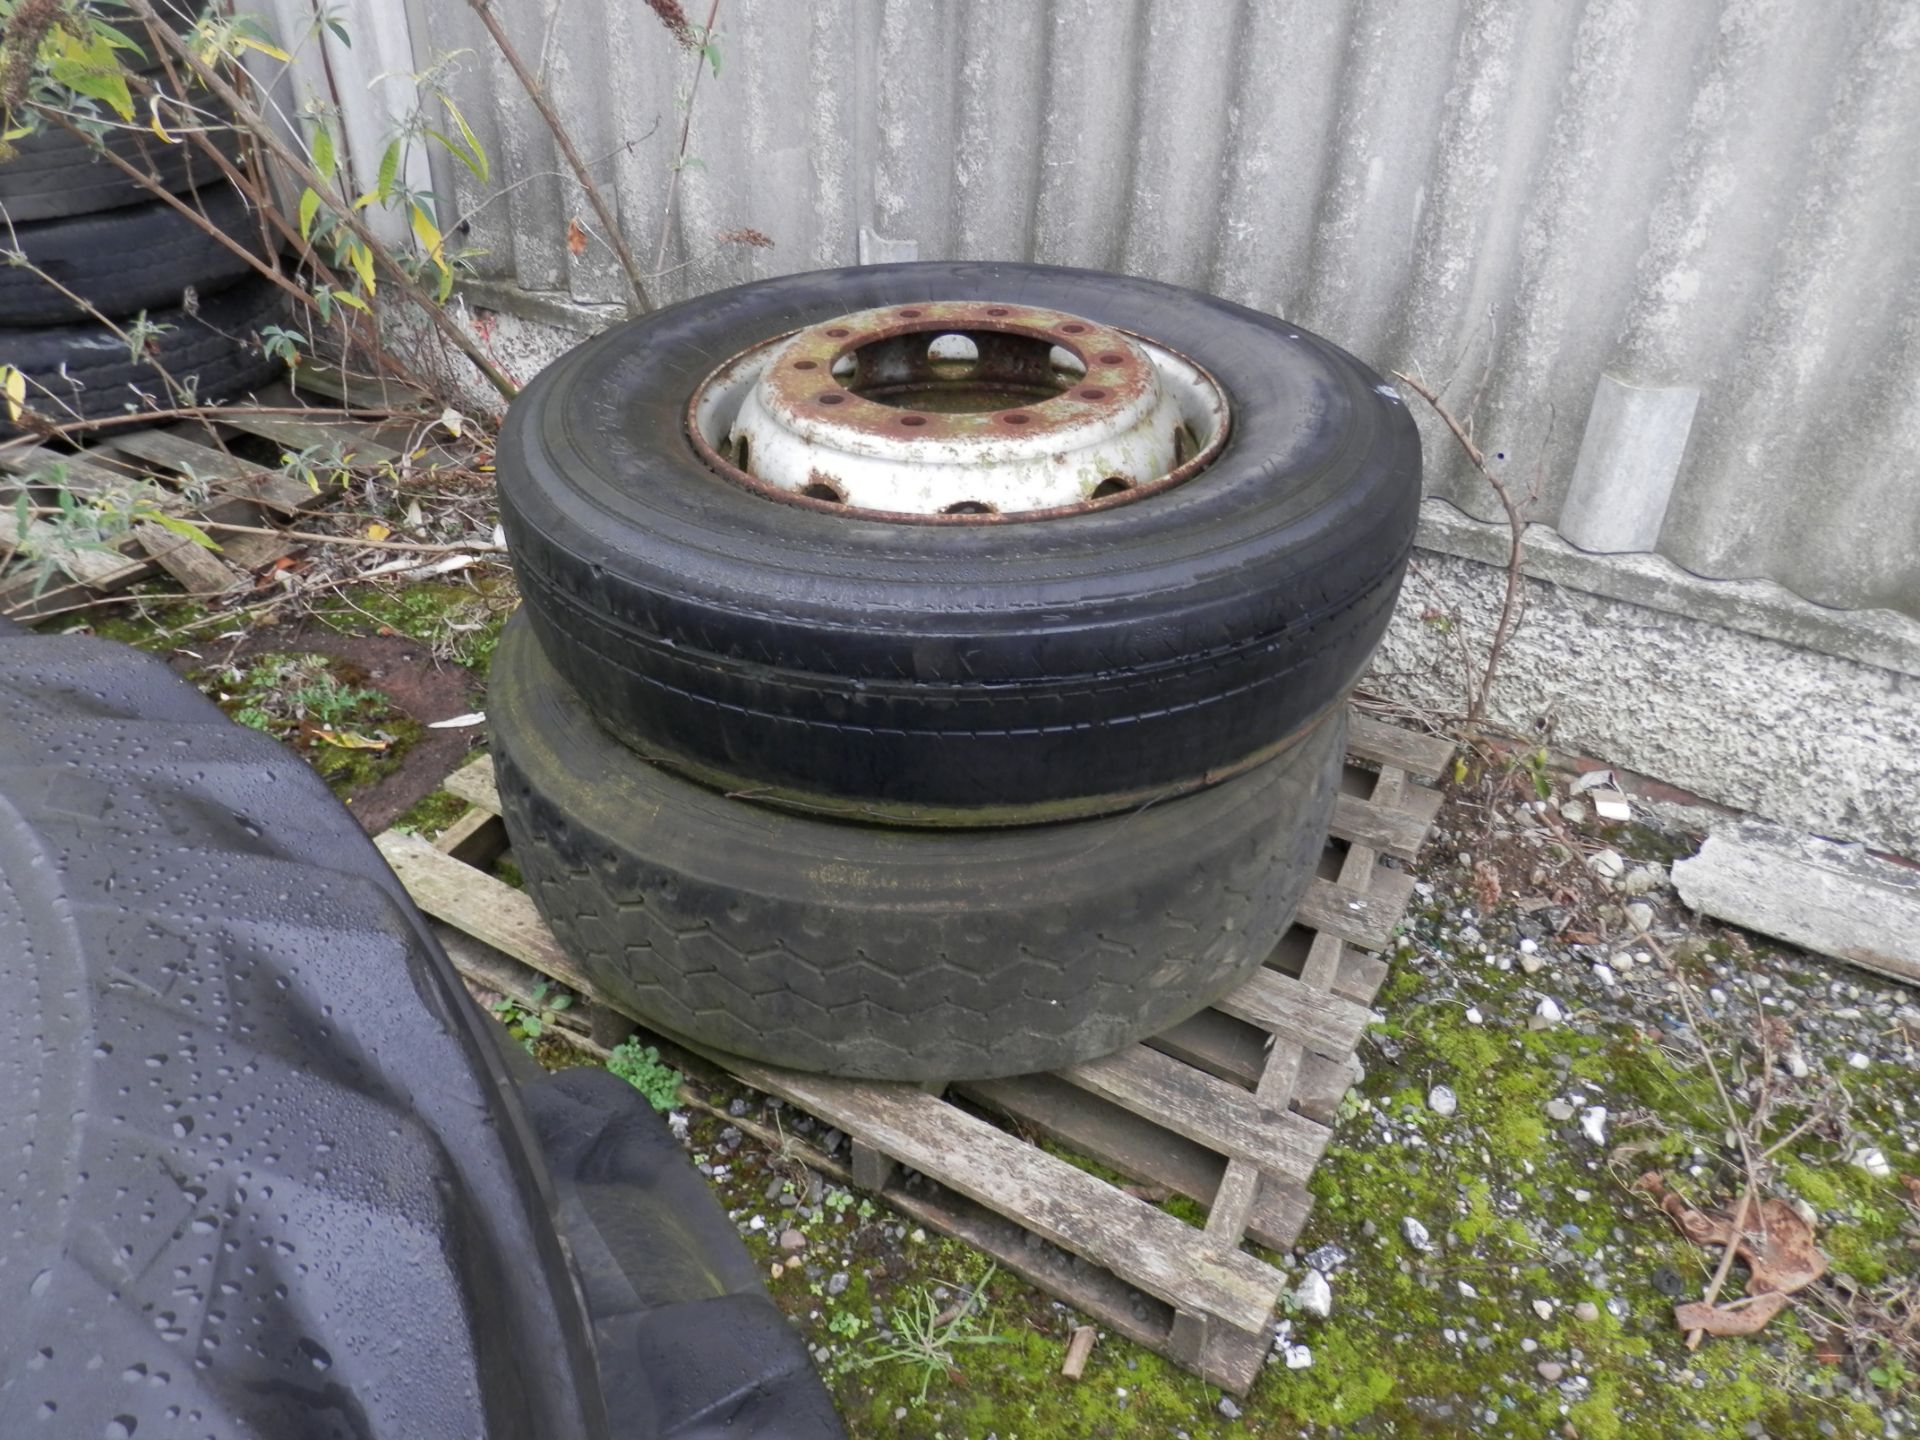 85 + ASSORTED LORRY, CAR & TRAILER TYRES & WHEELS, AS PICTURED. BUYER TO COLLECT COMPLETE JOBLOT. - Image 3 of 10